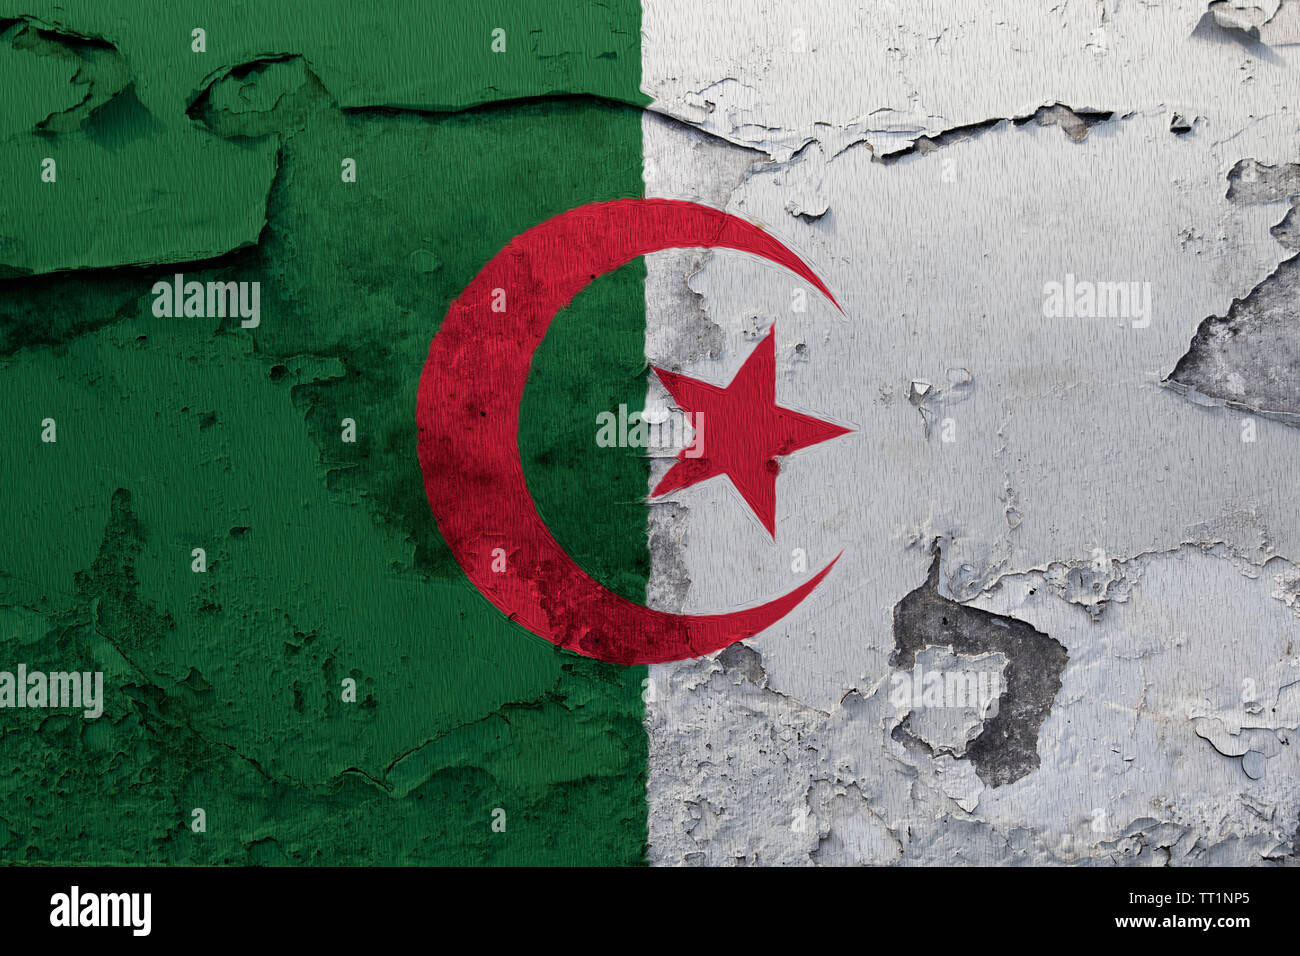 Algeria flag painted on the cracked grunge concrete wall Stock Photo